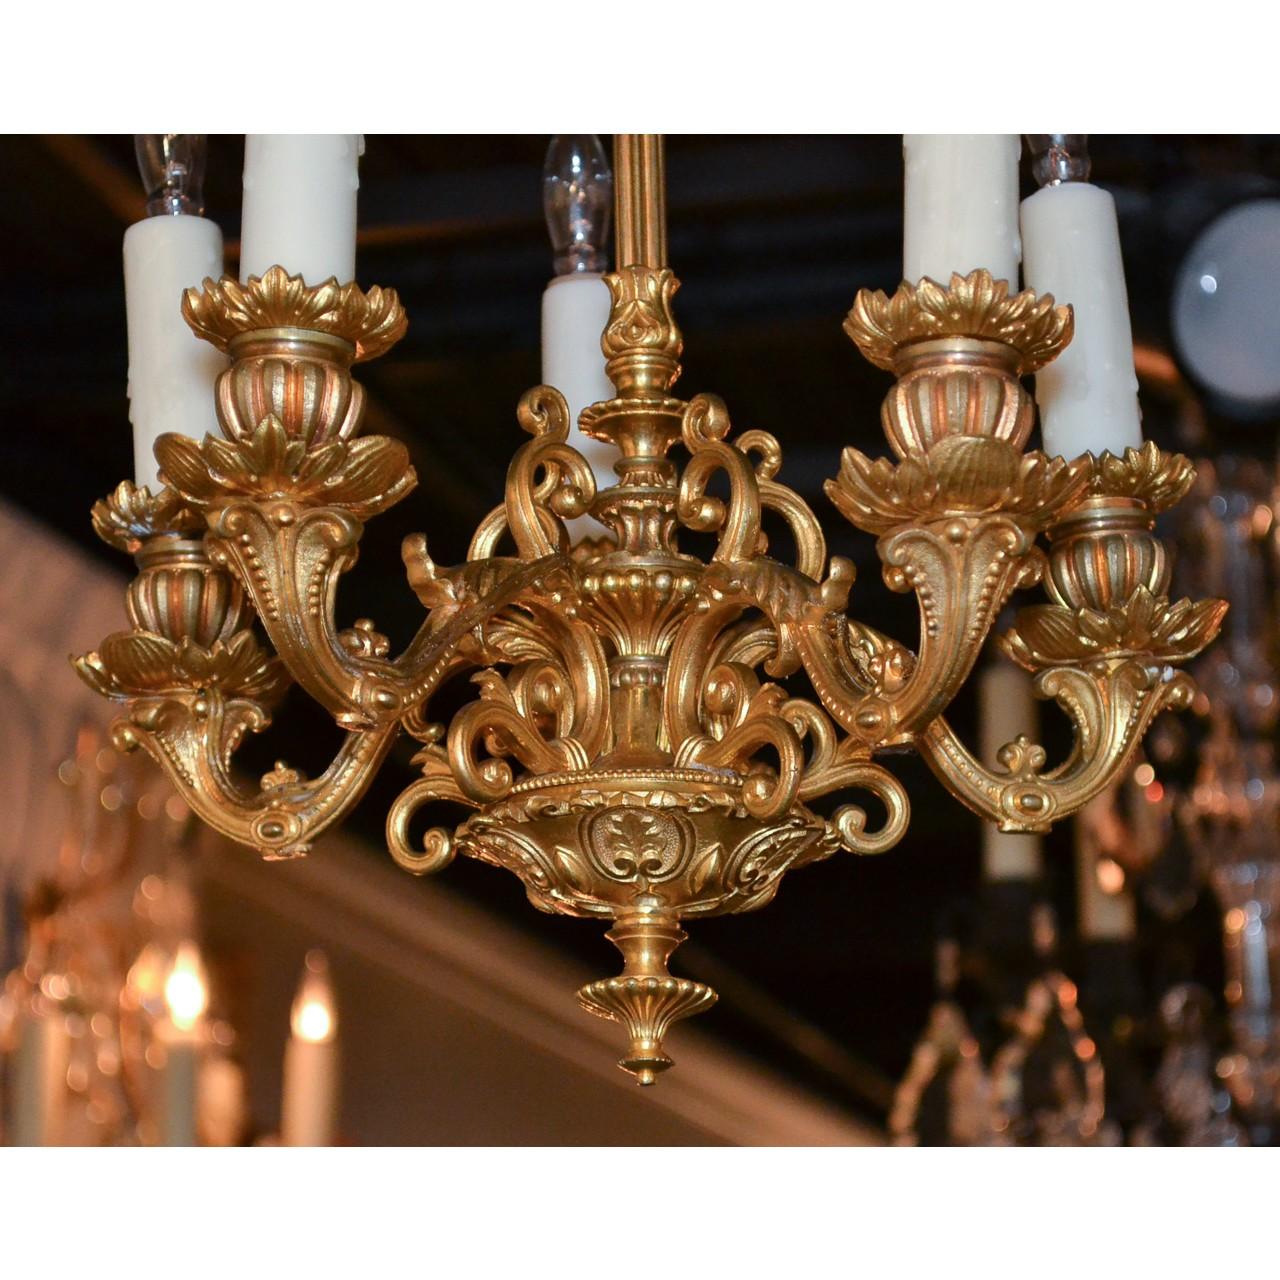 Elegant small scale 19th century French gilt bronze chandelier with a repousse decorated canopy atop an foliate motif stem and open-work cage. The gracefully scrolled horn-shaped arms with flower petal bobeches having urn and acanthus leaf styled